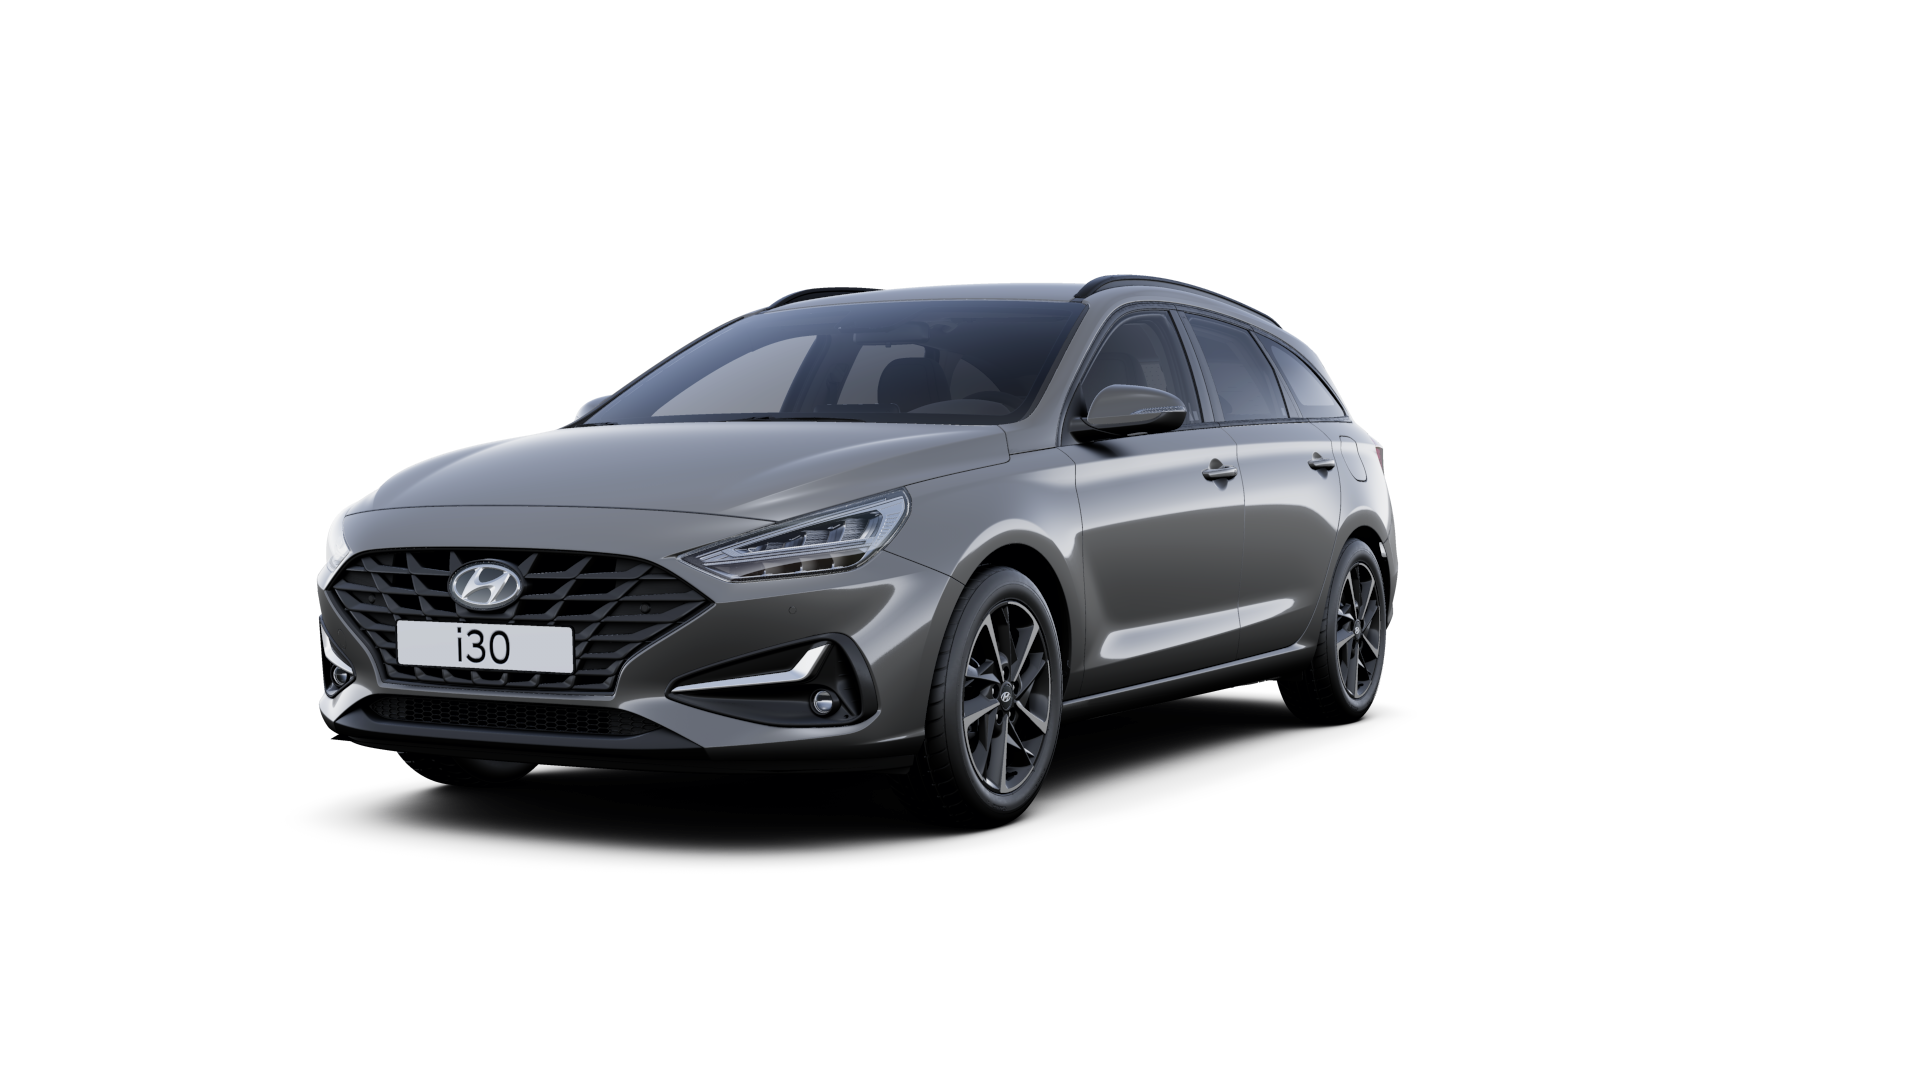 Front side view of the new Hyundai i30 Wagon in the colour Amazon Grey.